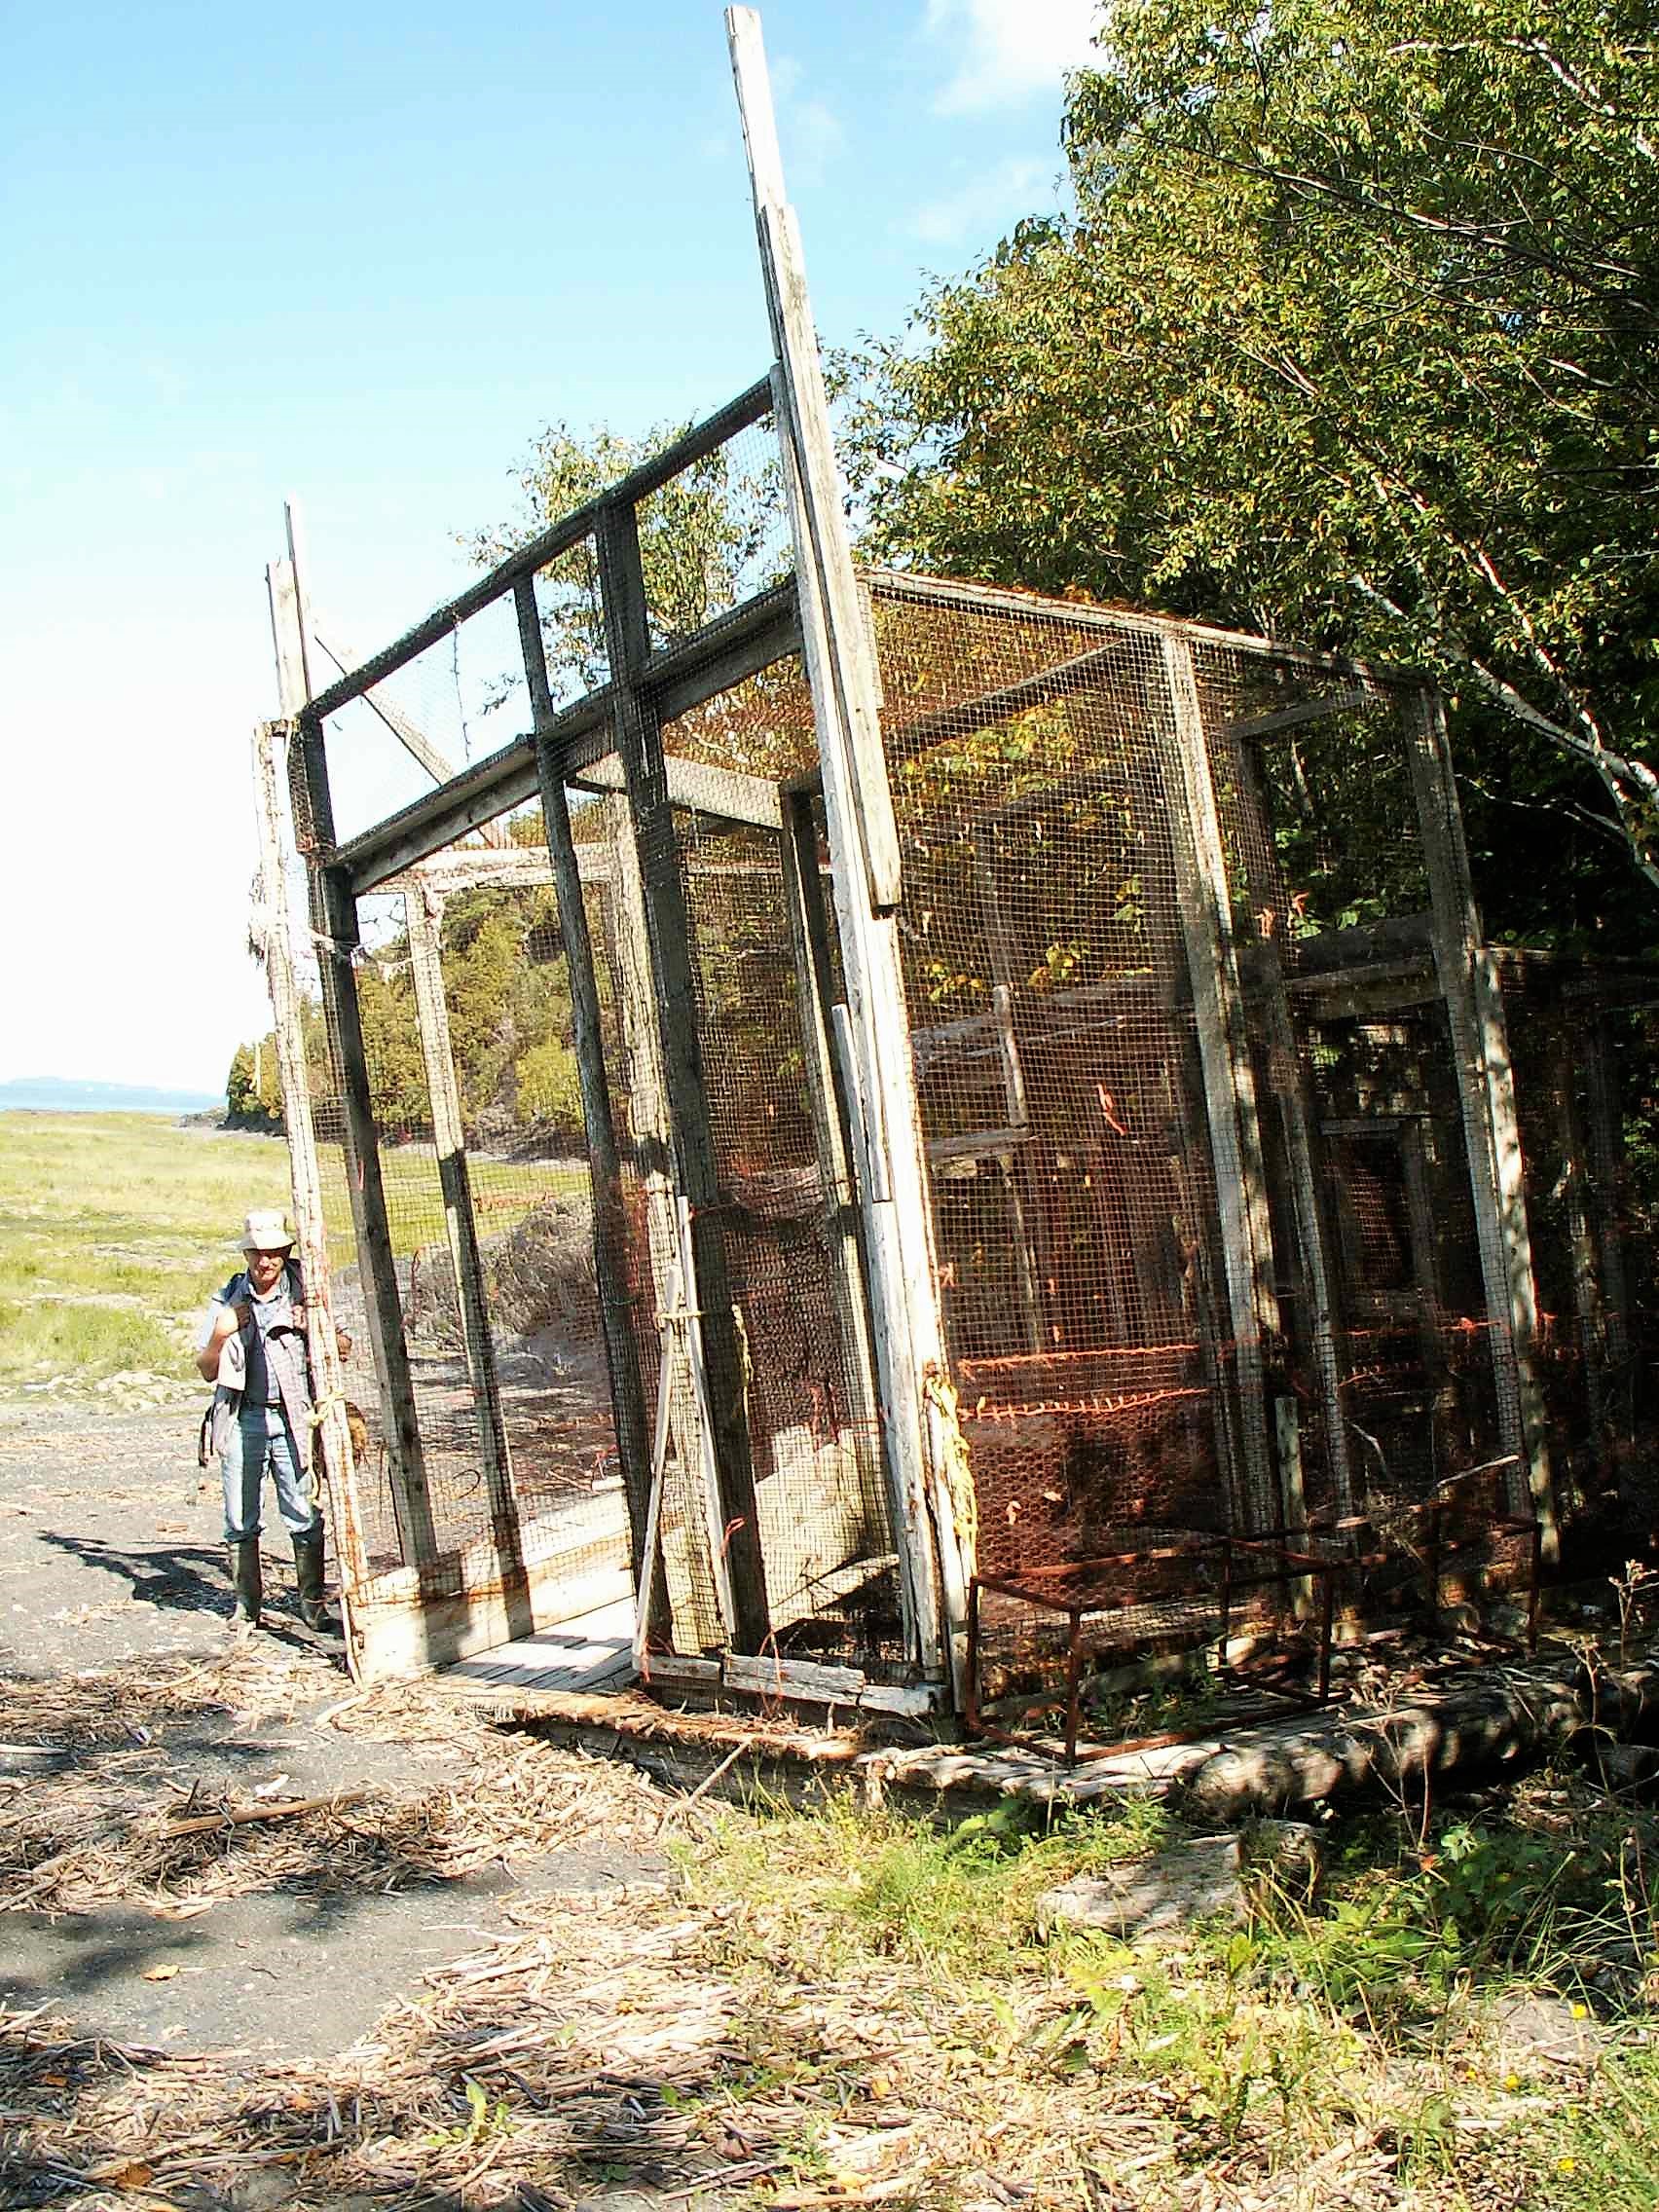 Trap made of wire mesh and wood plank framing. It measures about 6 m by 5 m and is beached in a cove bordered with trees. A man is standing on the left-hand side of the photograph. It’s summertime.